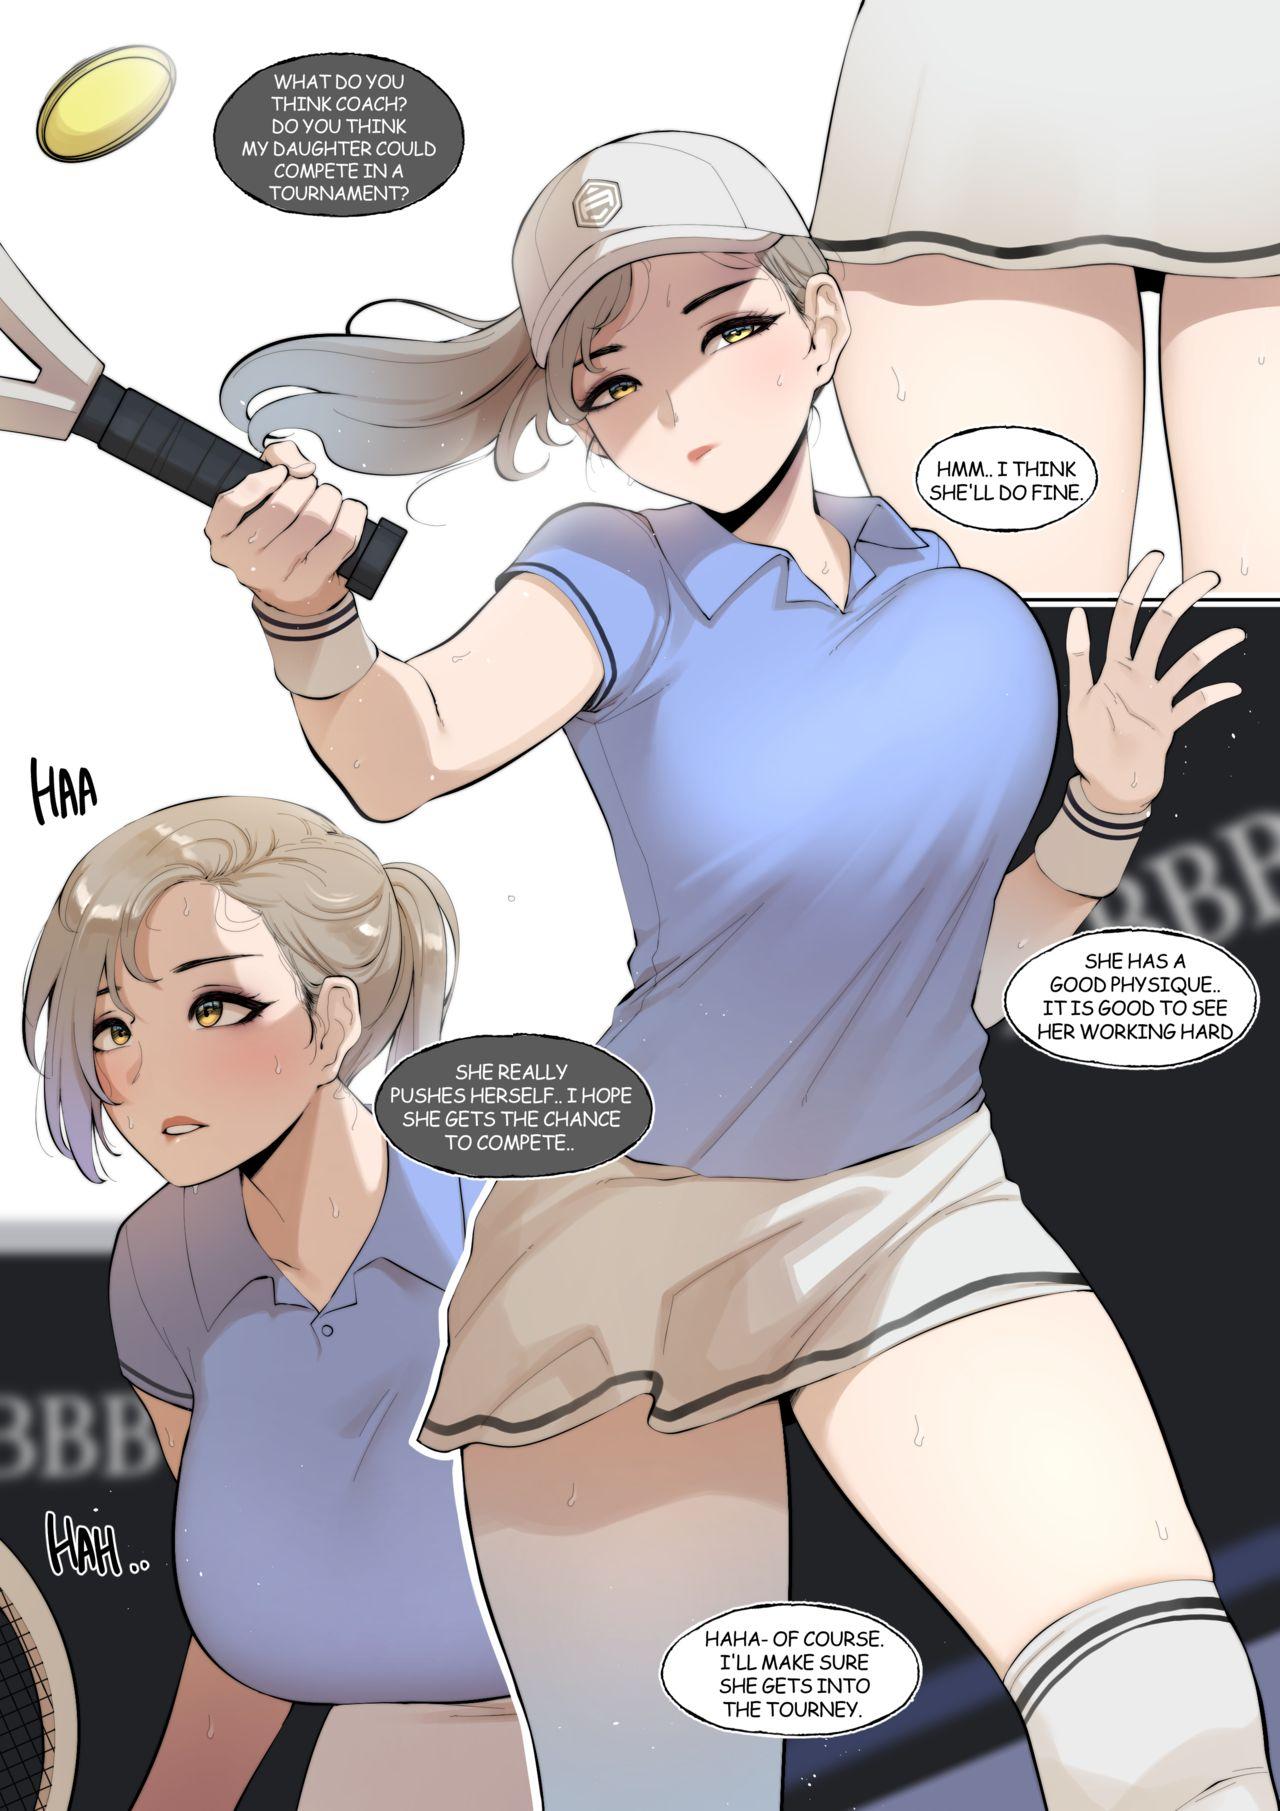 Woman Fucking It's Normal for us to Have Sex if You Lose Right? Tennis edition - Original Fisting - Page 2